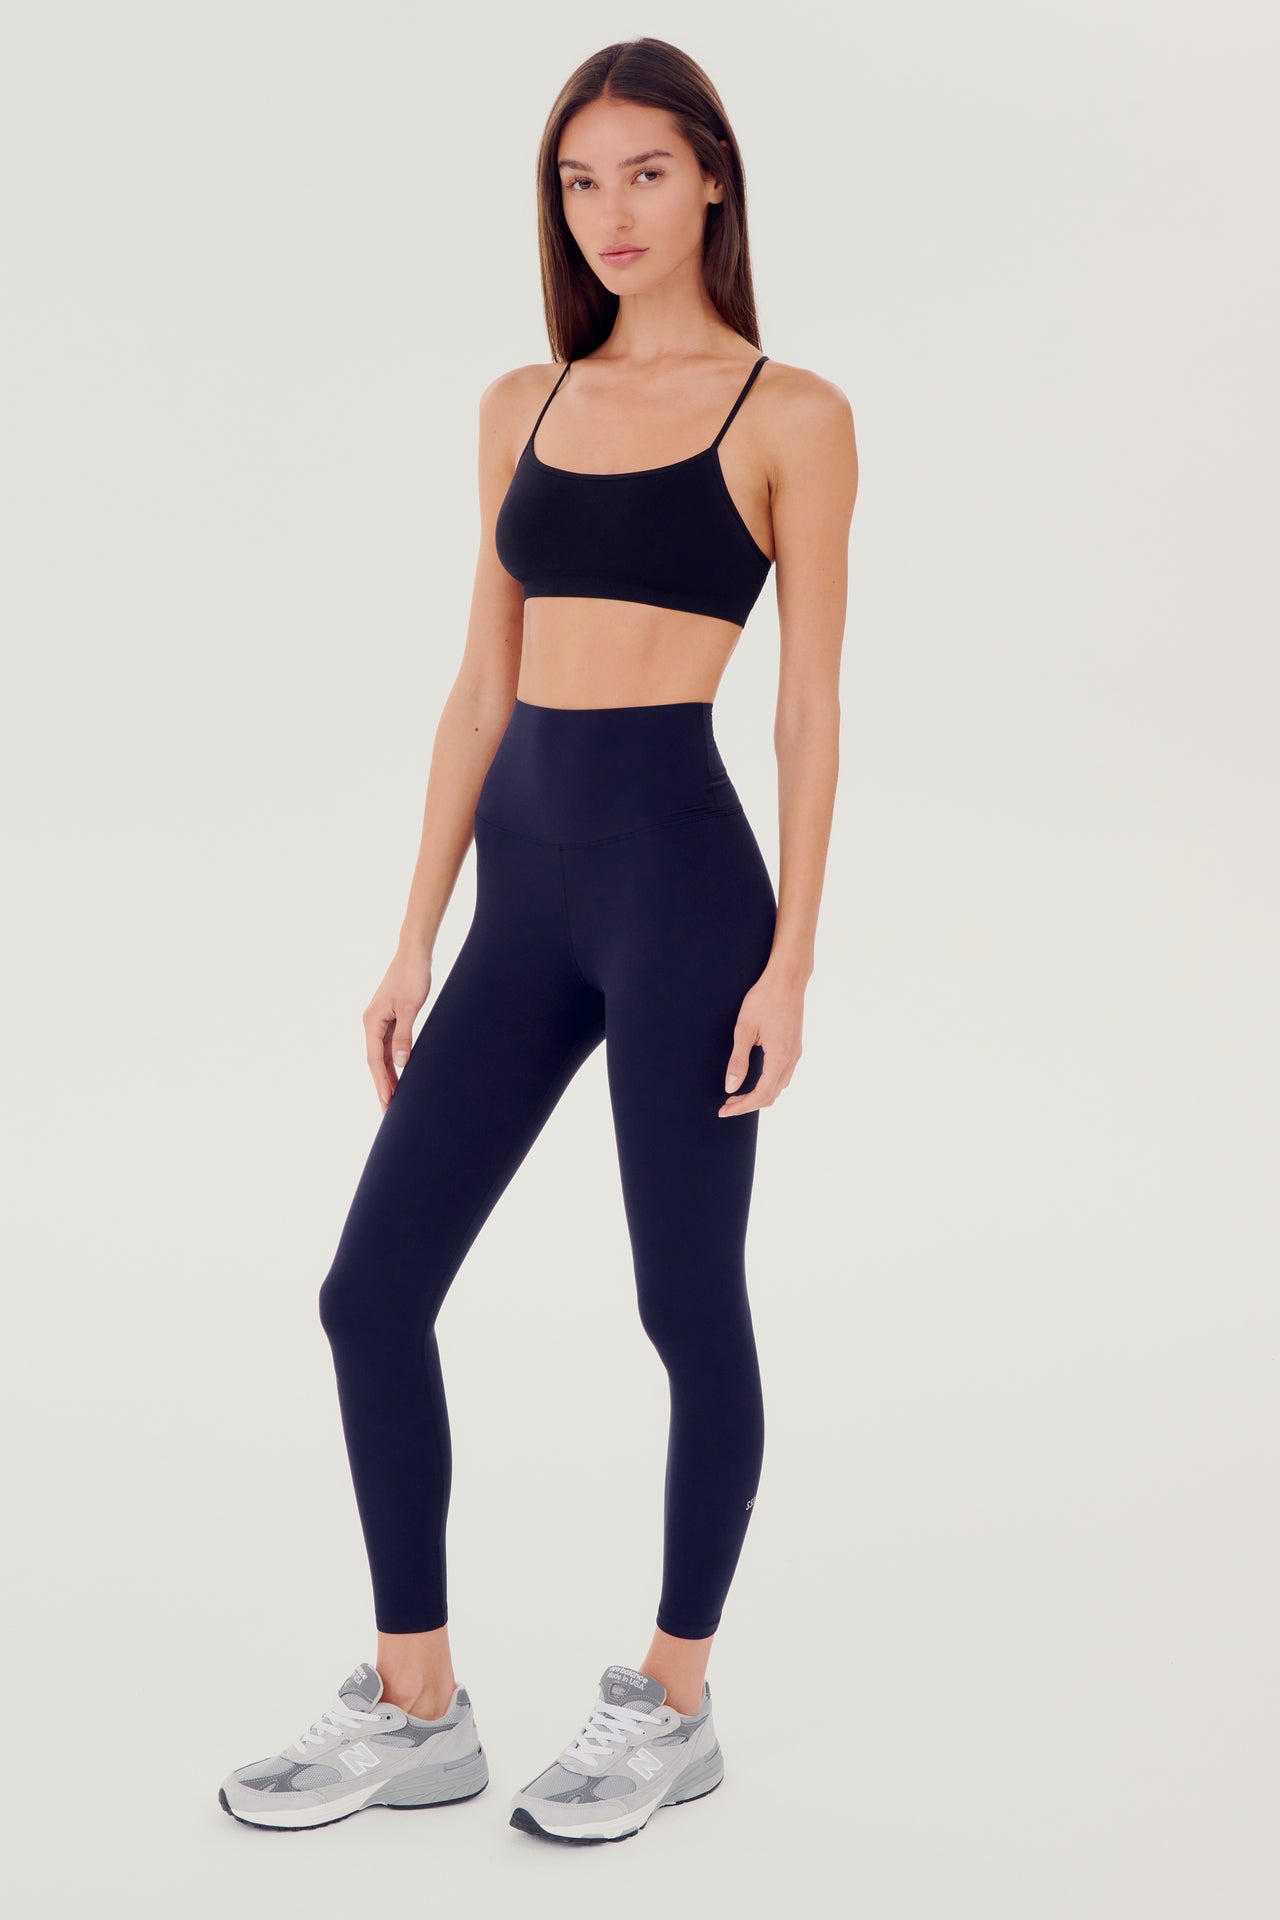 Full side view of girl wearing dark blue leggings right above the ankle with dark blue sports bra and grey shoes